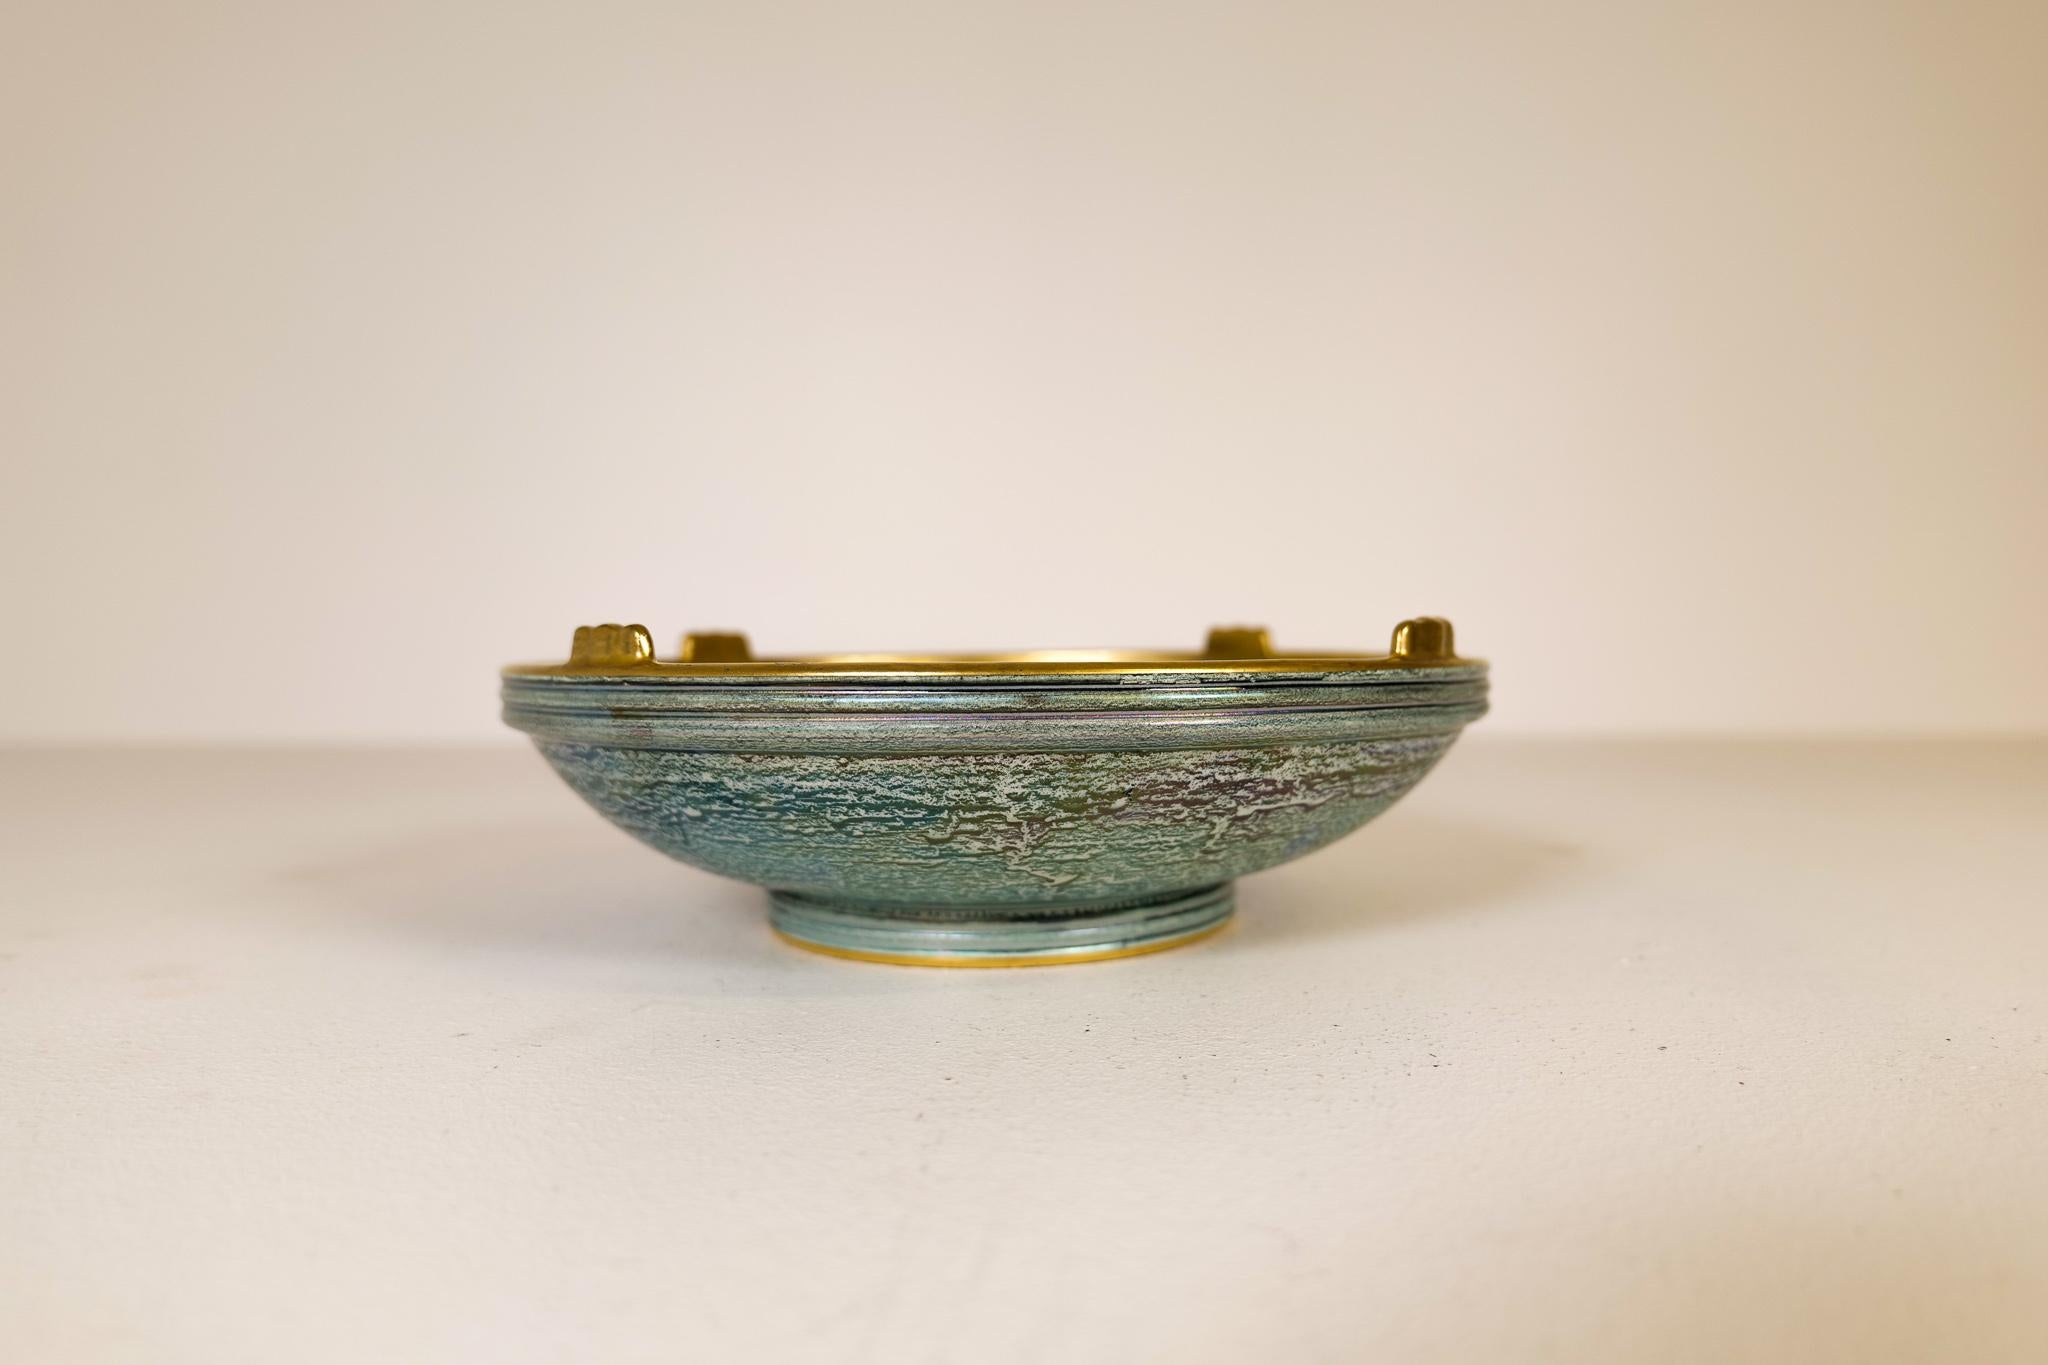 A wonderful bowl created by Josef Ekberg and manufactured by Gustavsberg Sweden in 1920s. Wonderful green glaze with hand painted gold pattern on the bowl. 

Very good vintage condition. 

Dimension: Diameter 27 cm height 9 cm.
 